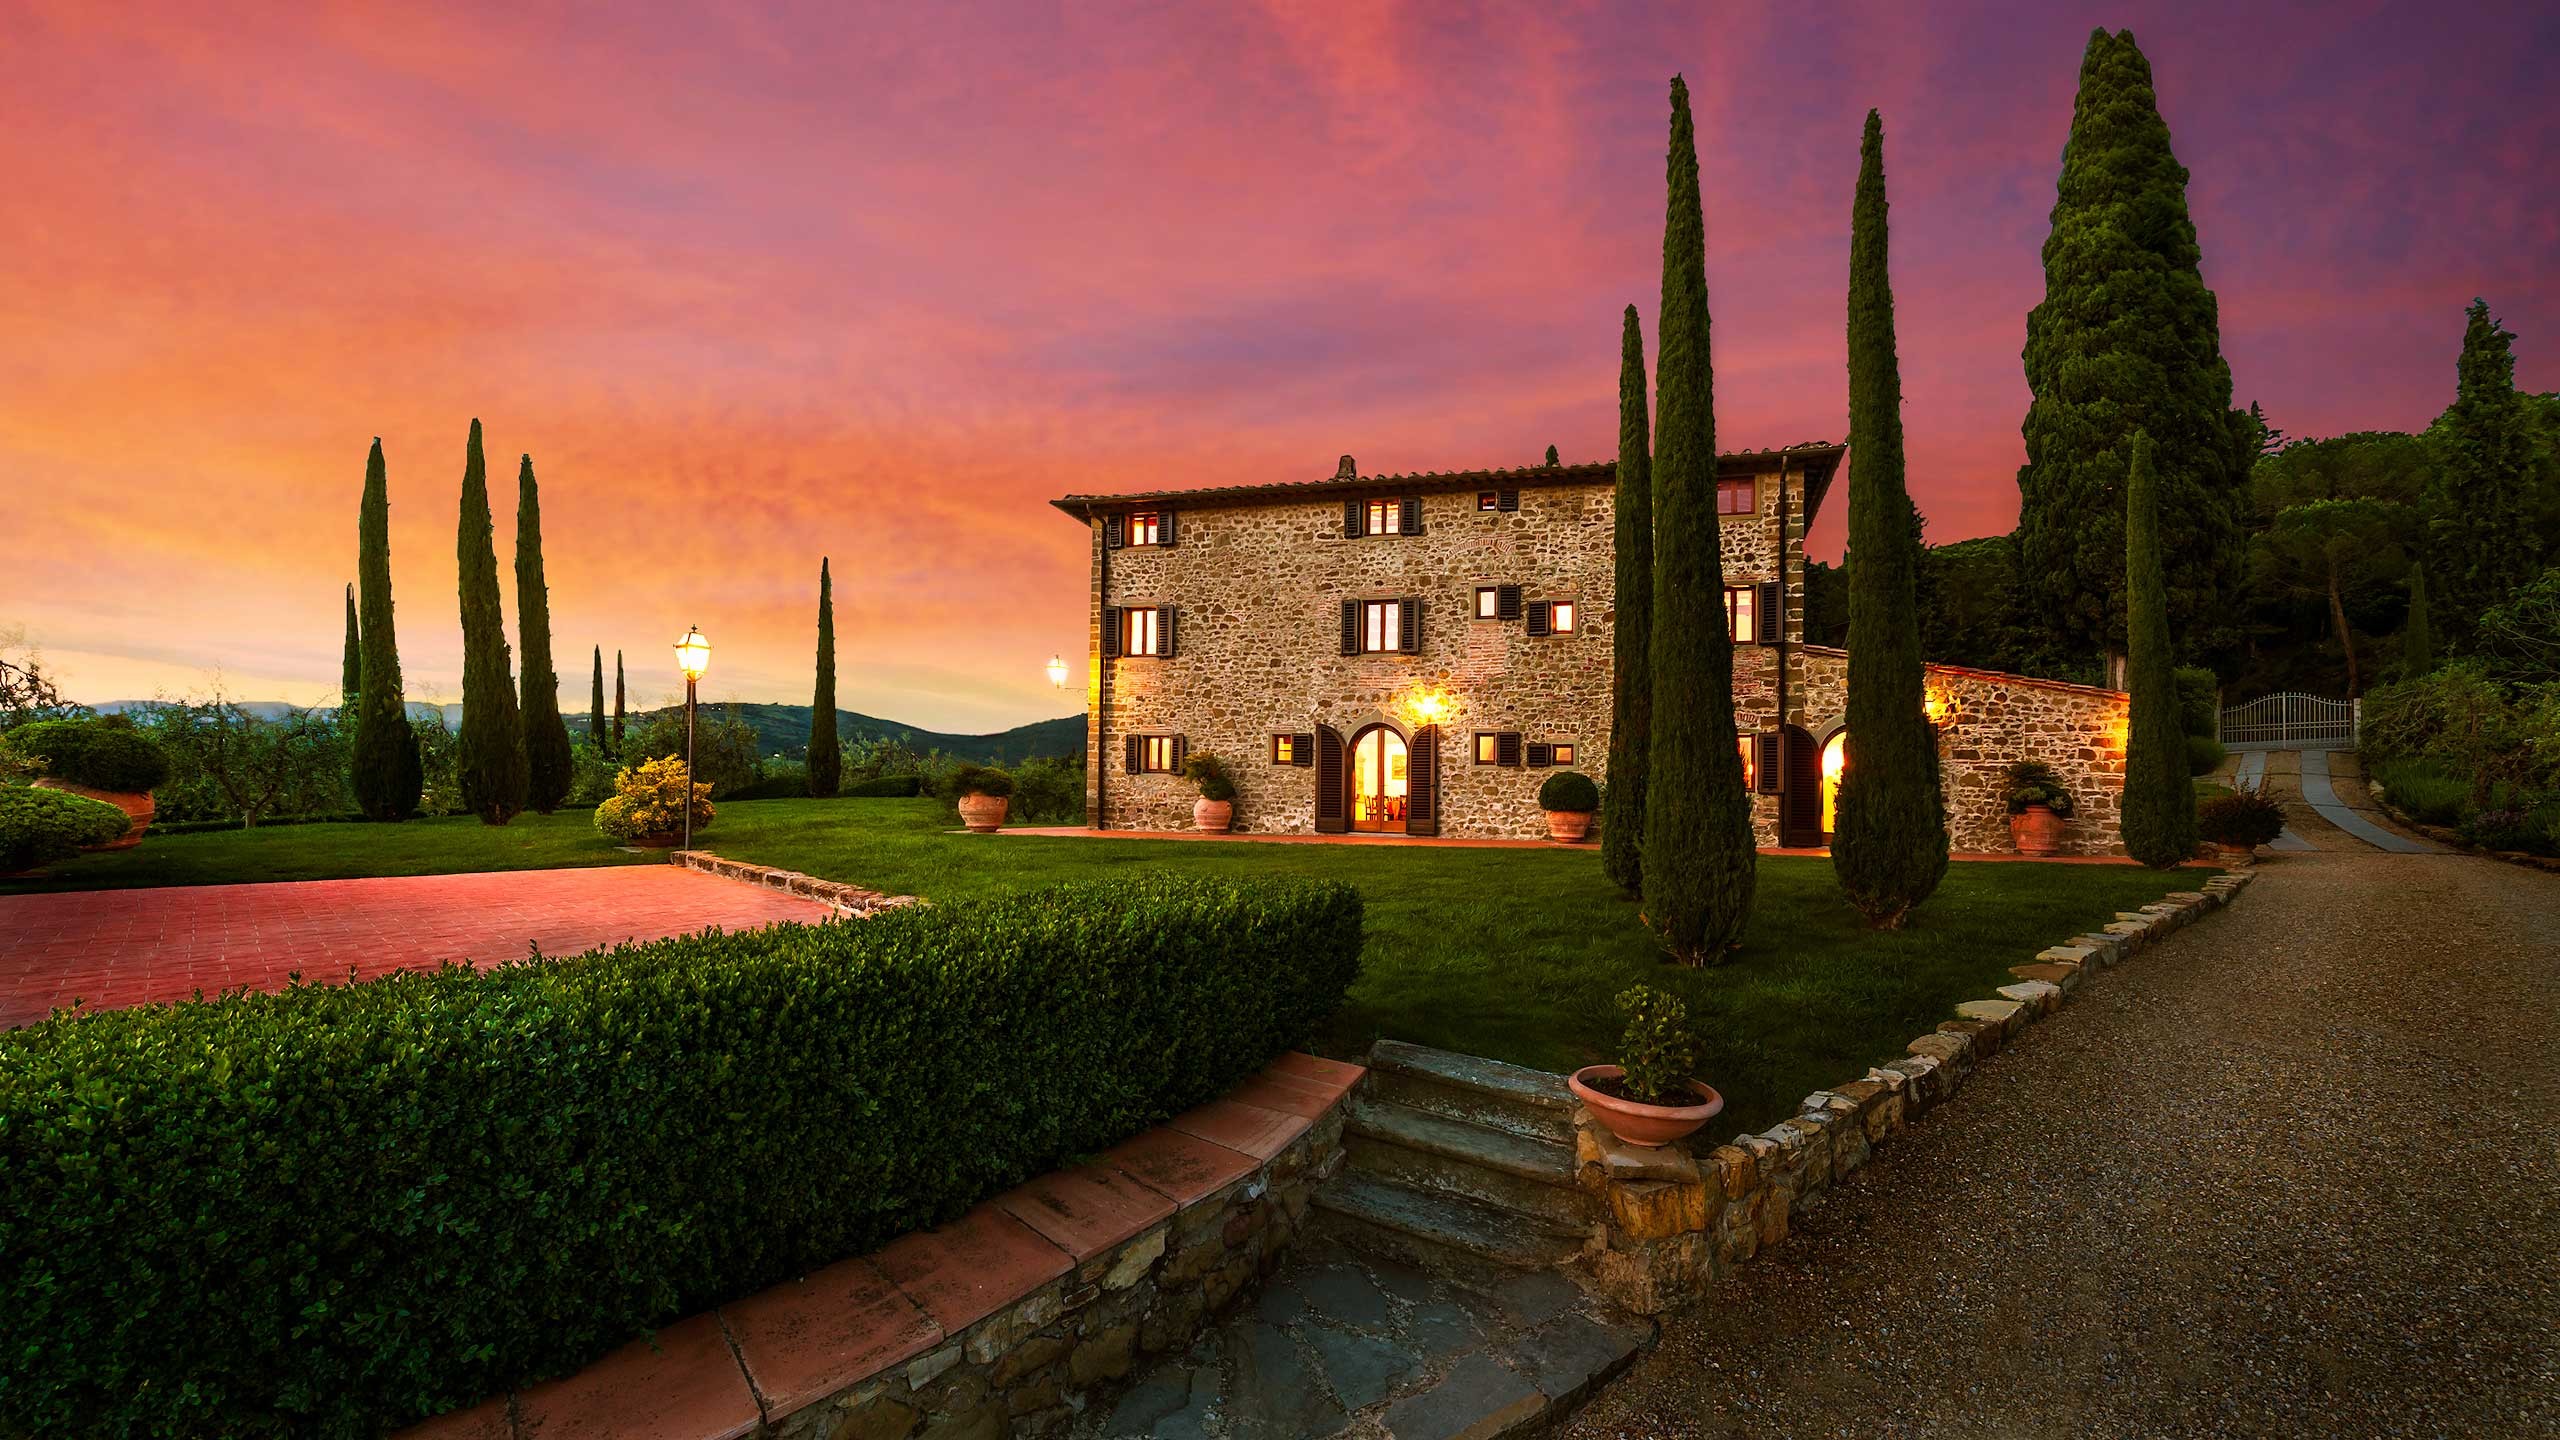 2560x1440 Mansion in Tuscany, Italy HD Wallpaper | Hintergrund |  |  ID:746224 - Wallpaper Abyss